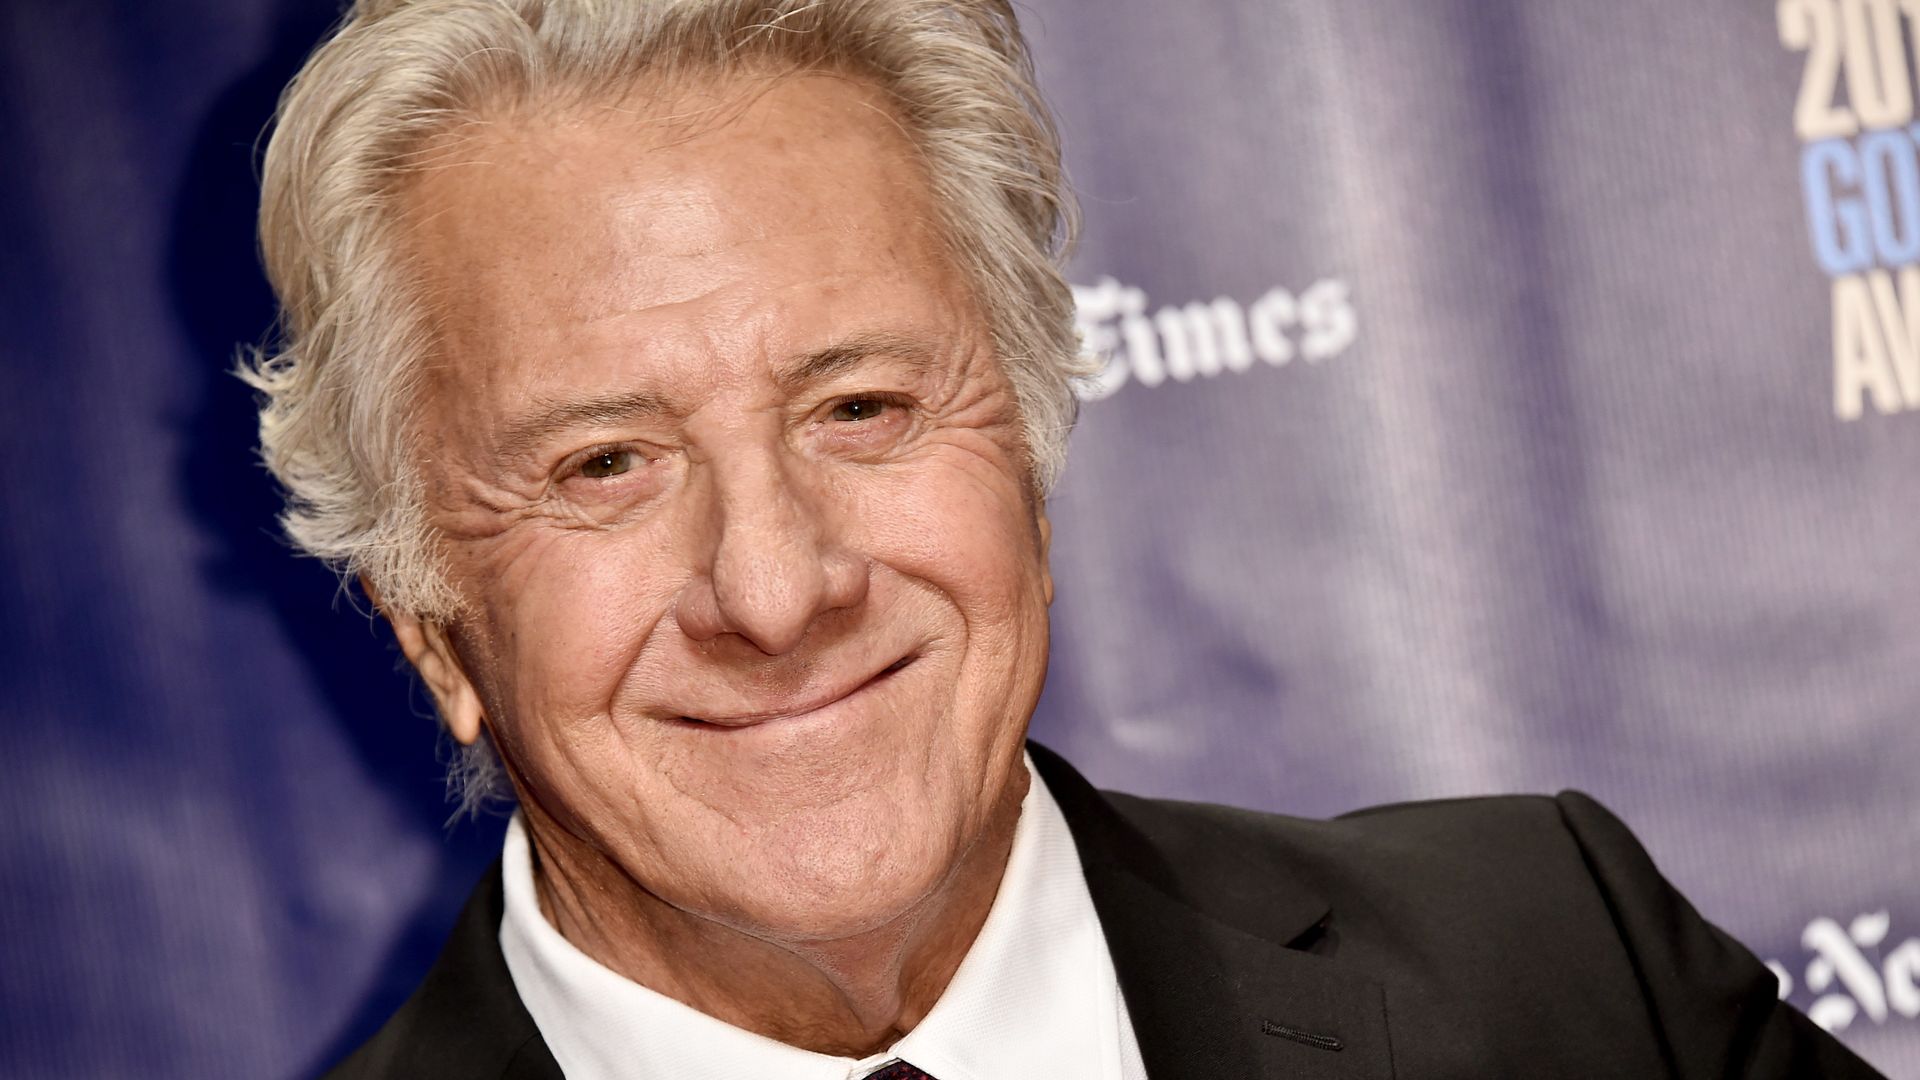 Dustin Hoffman's appearance at 86 will leave fans lost for words - see rare photos with wife